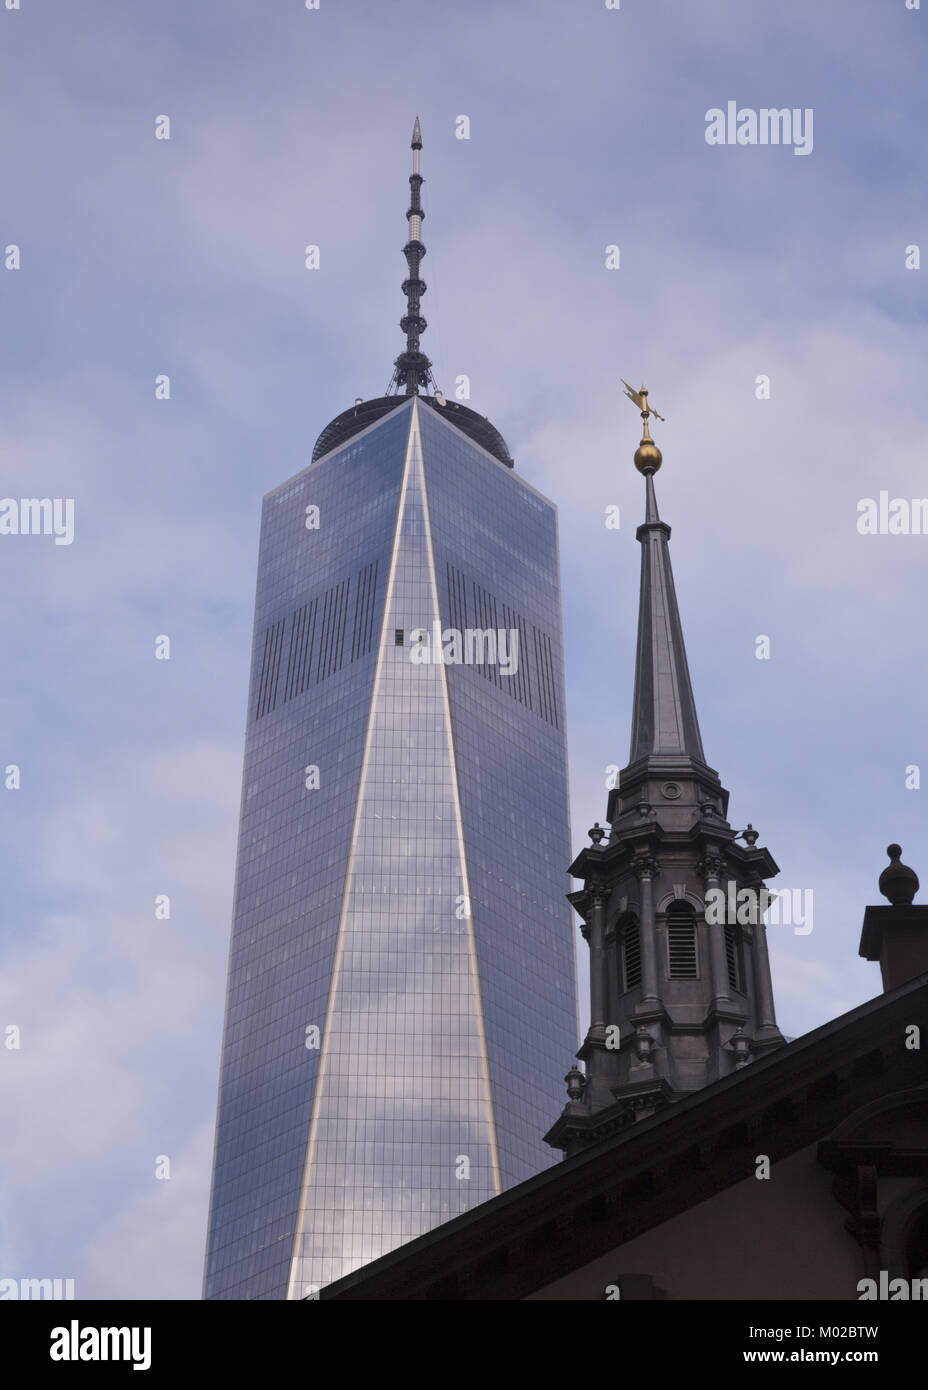 The steeples of religion and capitalism, Saint Paul's Chapel/Trinity Church,  World Trade Center, Freedom Tower, lower Manhattan, NYC. Stock Photo